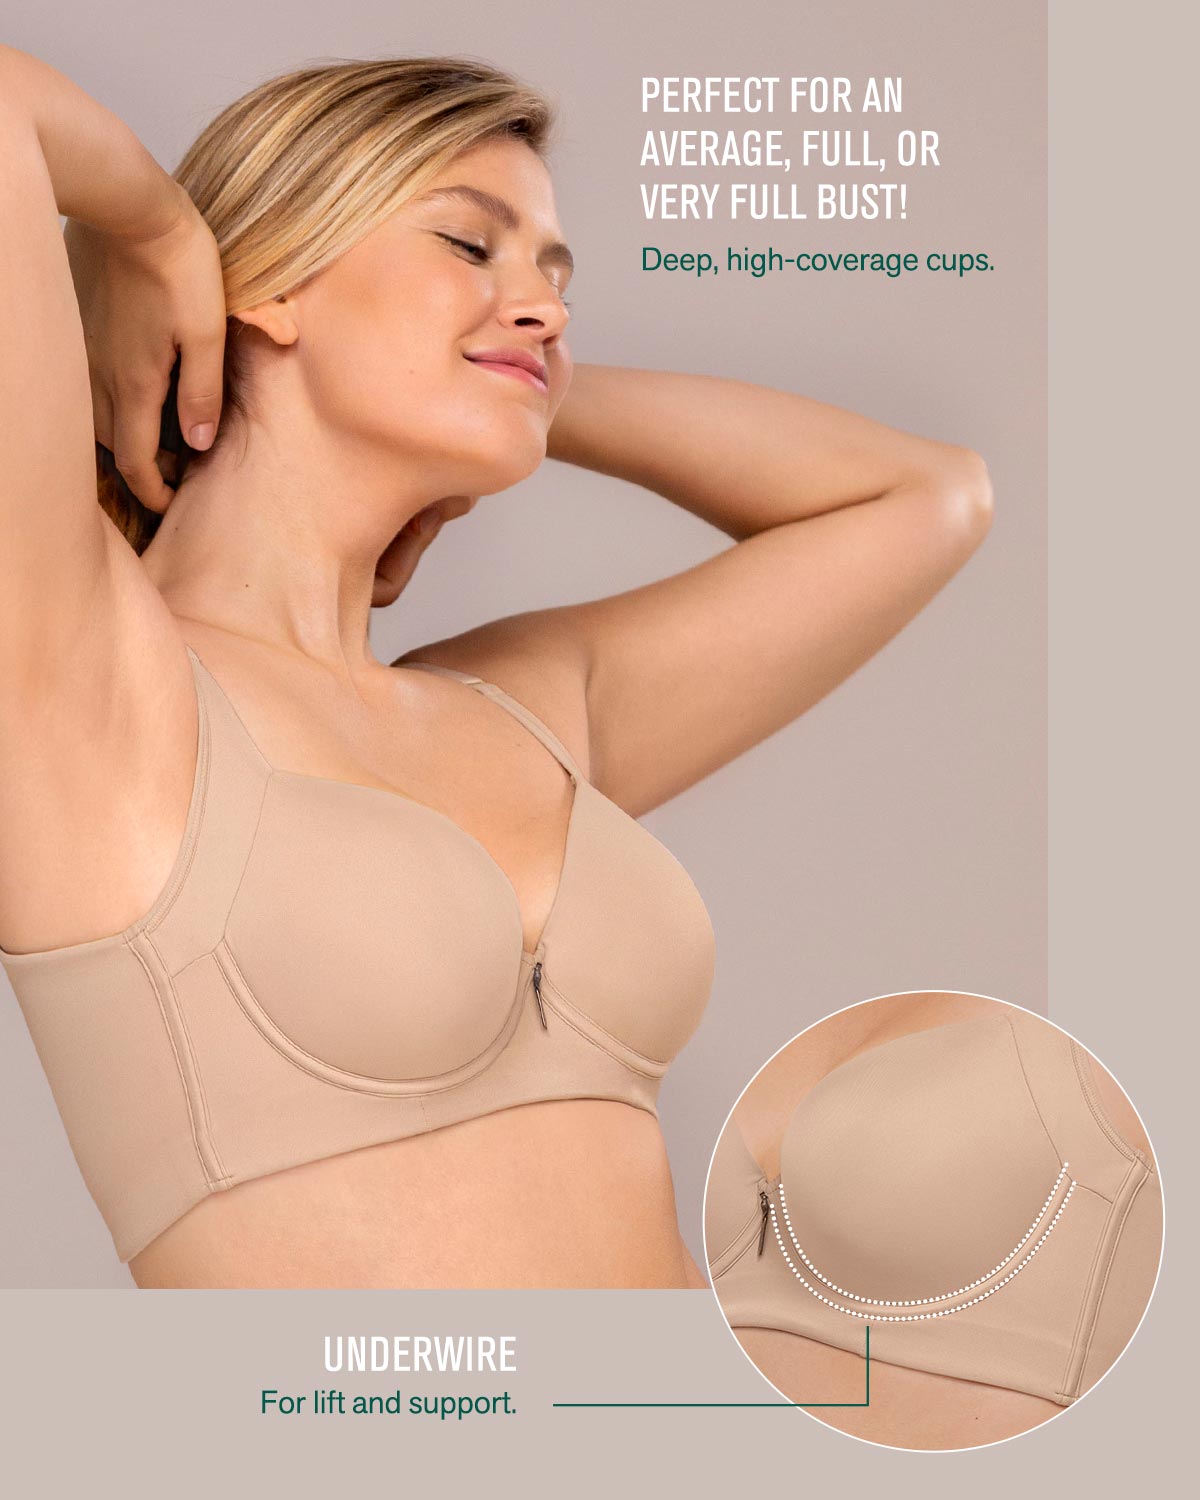 Full Coverage Bras for Great Support